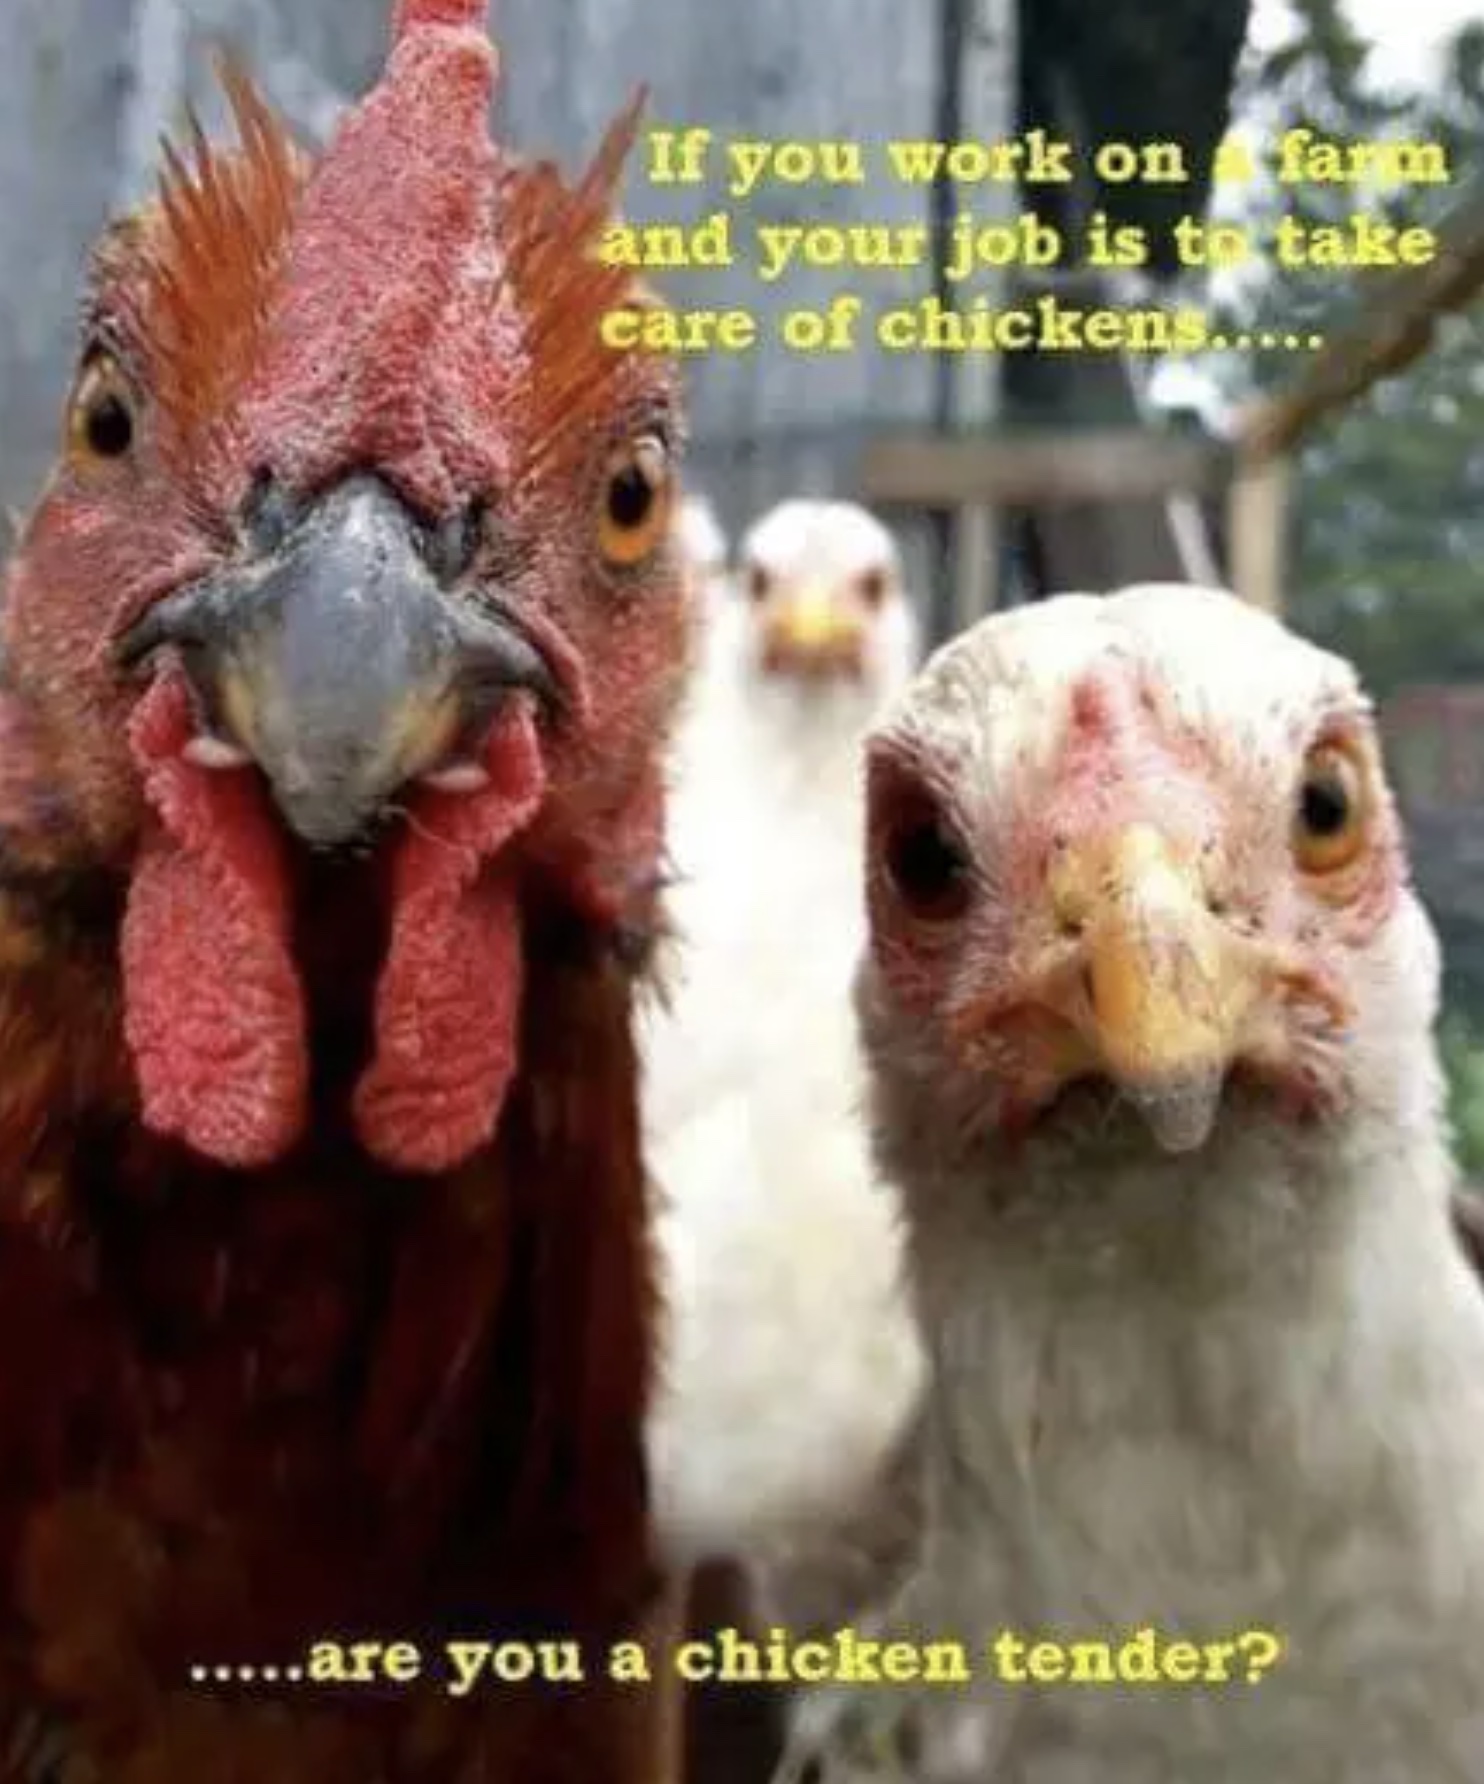 A photo of chickens, with overlaid text 'If you work on a farm and your job is to take care of chickens... ...are you a chicken tender?'